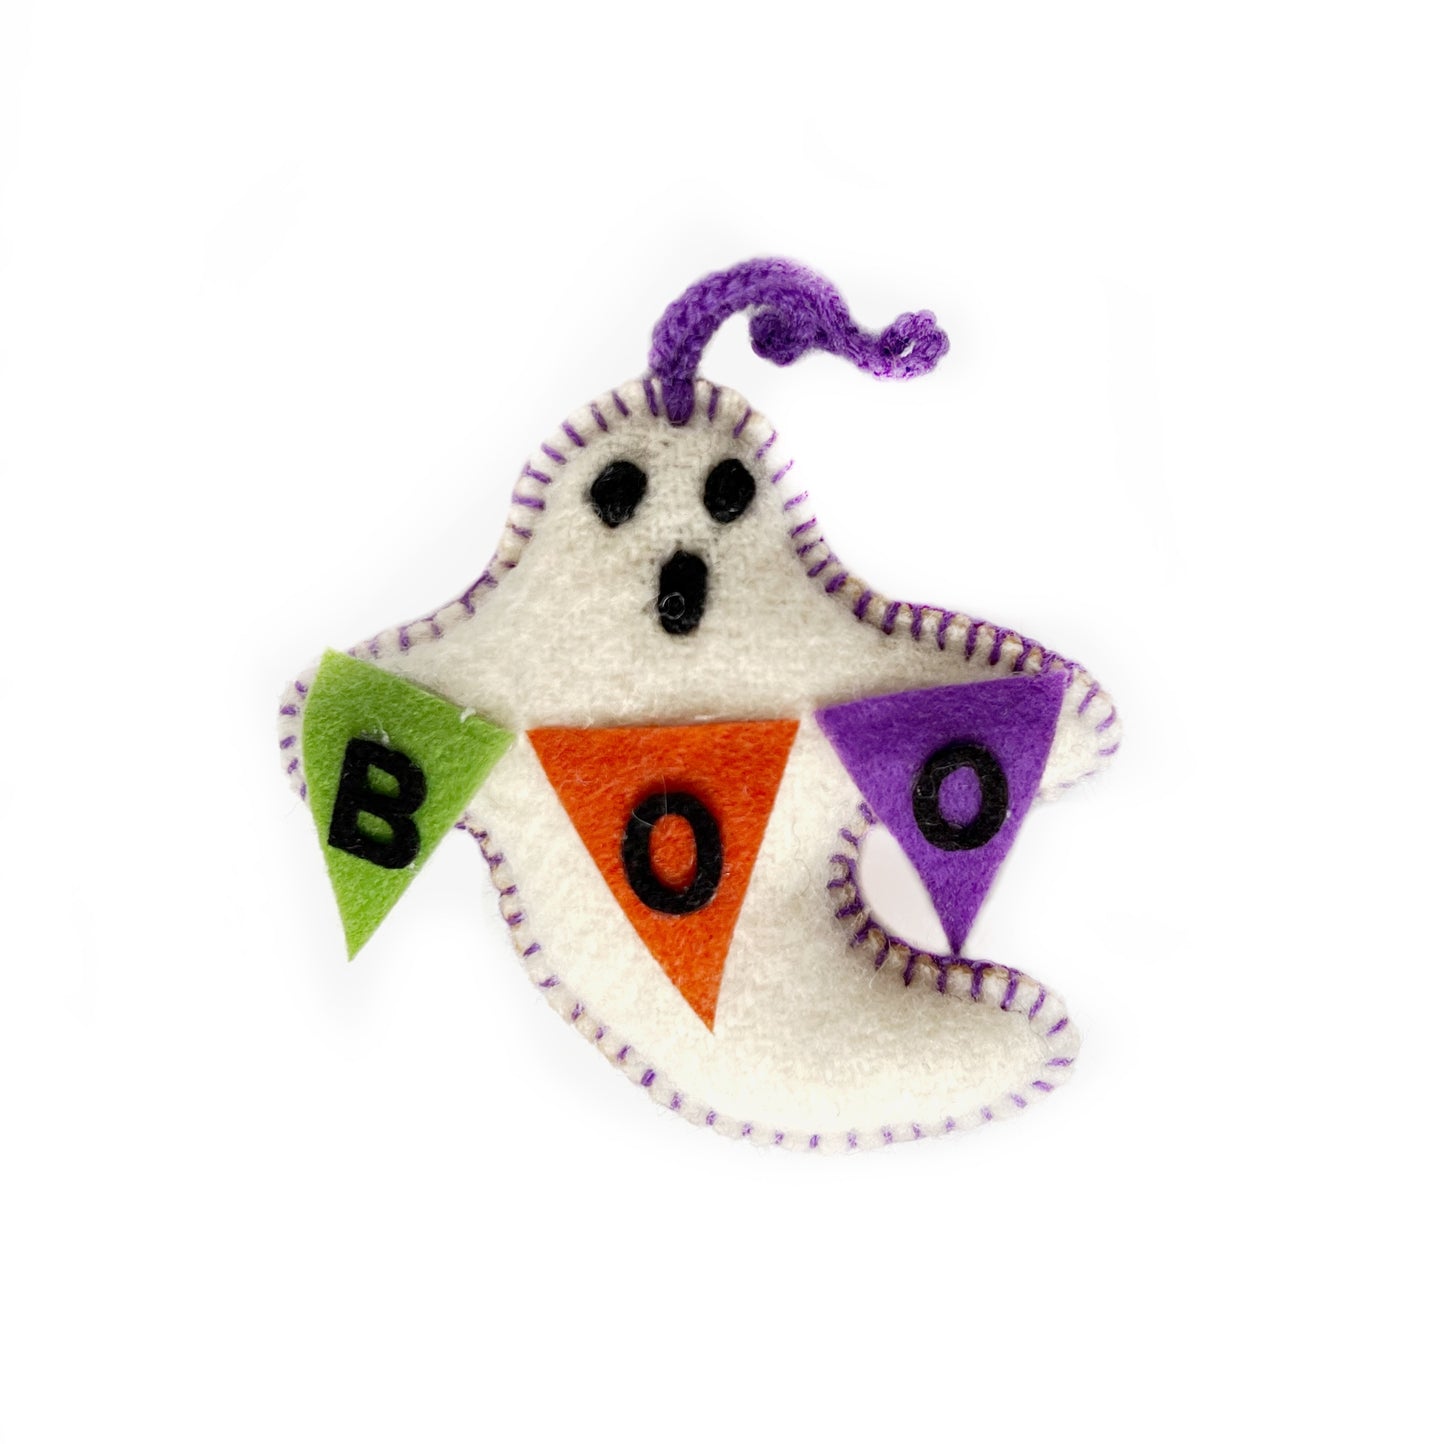 Colorful Halloween Ornament: Boo Ghost